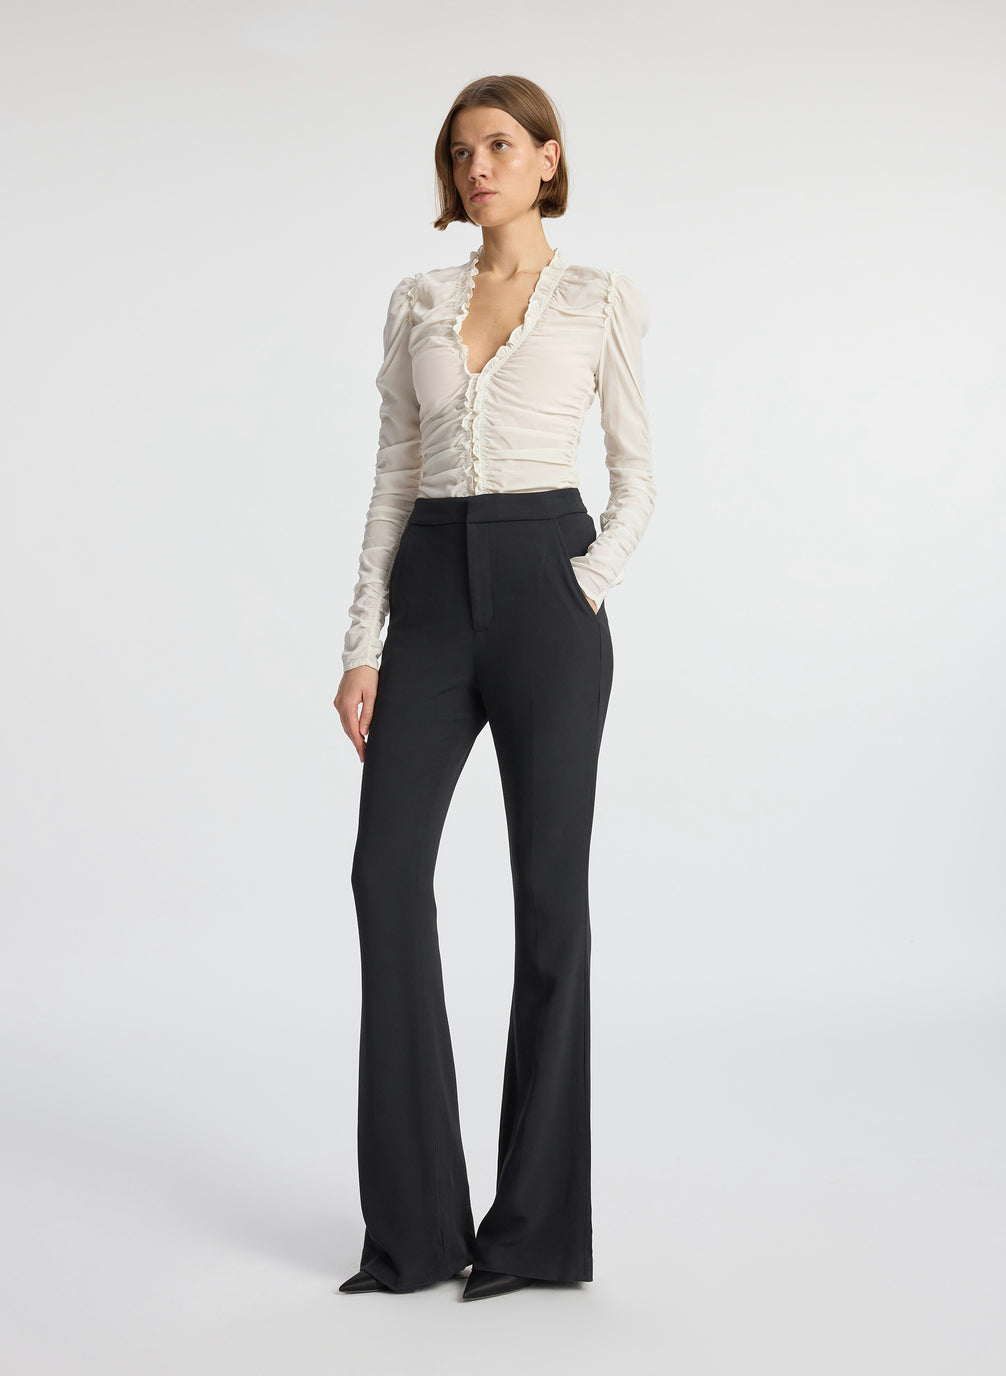 side view of woman wearing white long sleeve v neck top and black flared pants